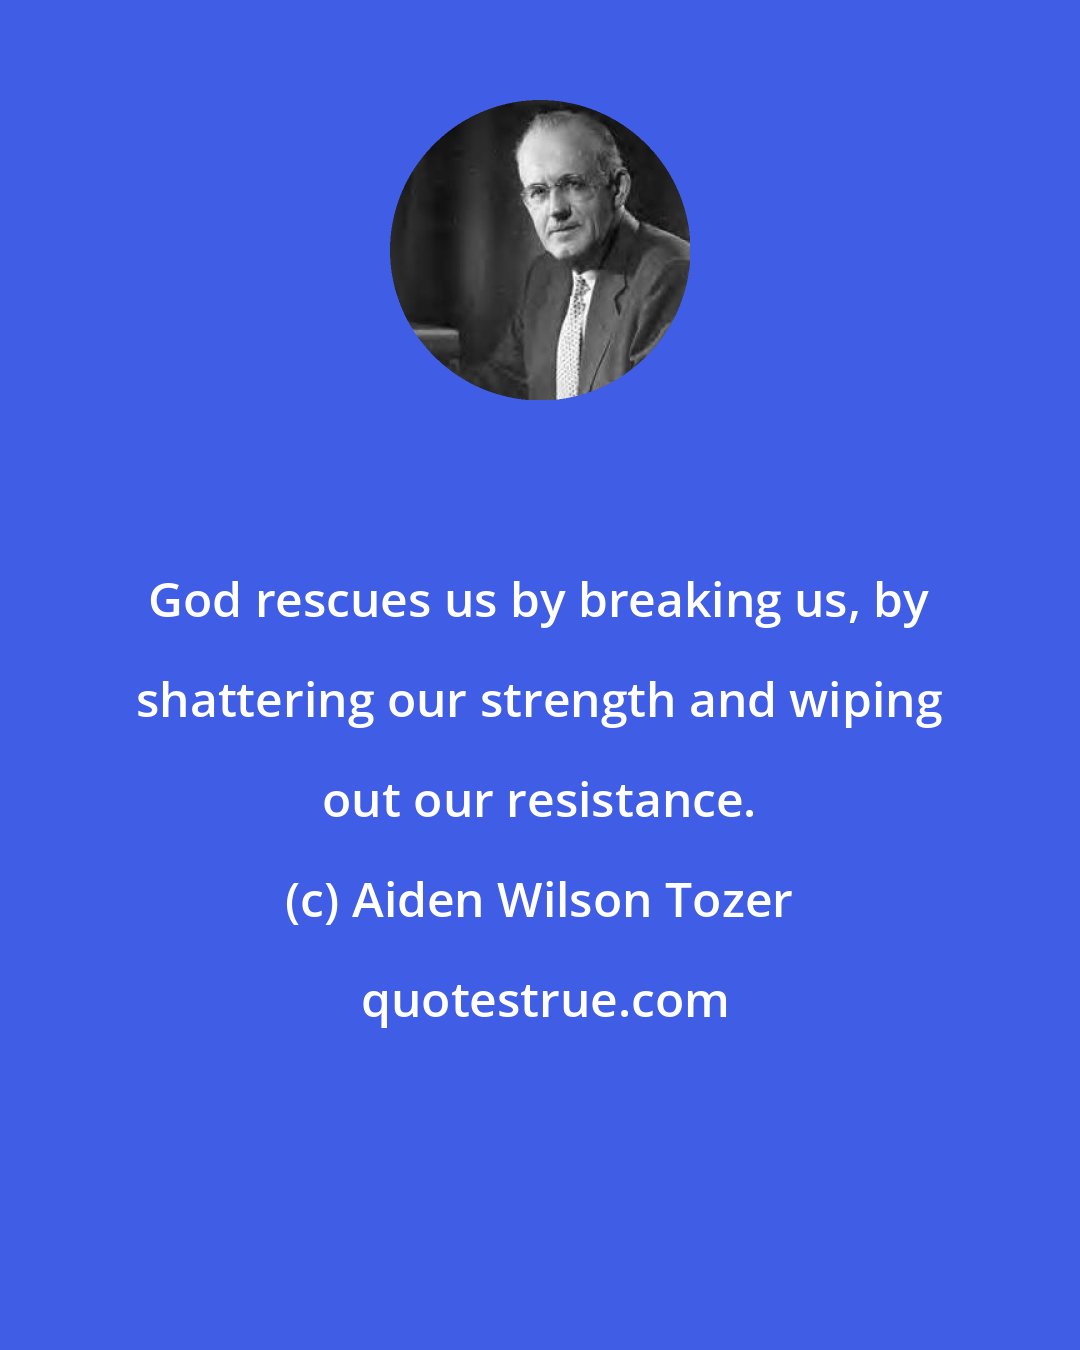 Aiden Wilson Tozer: God rescues us by breaking us, by shattering our strength and wiping out our resistance.